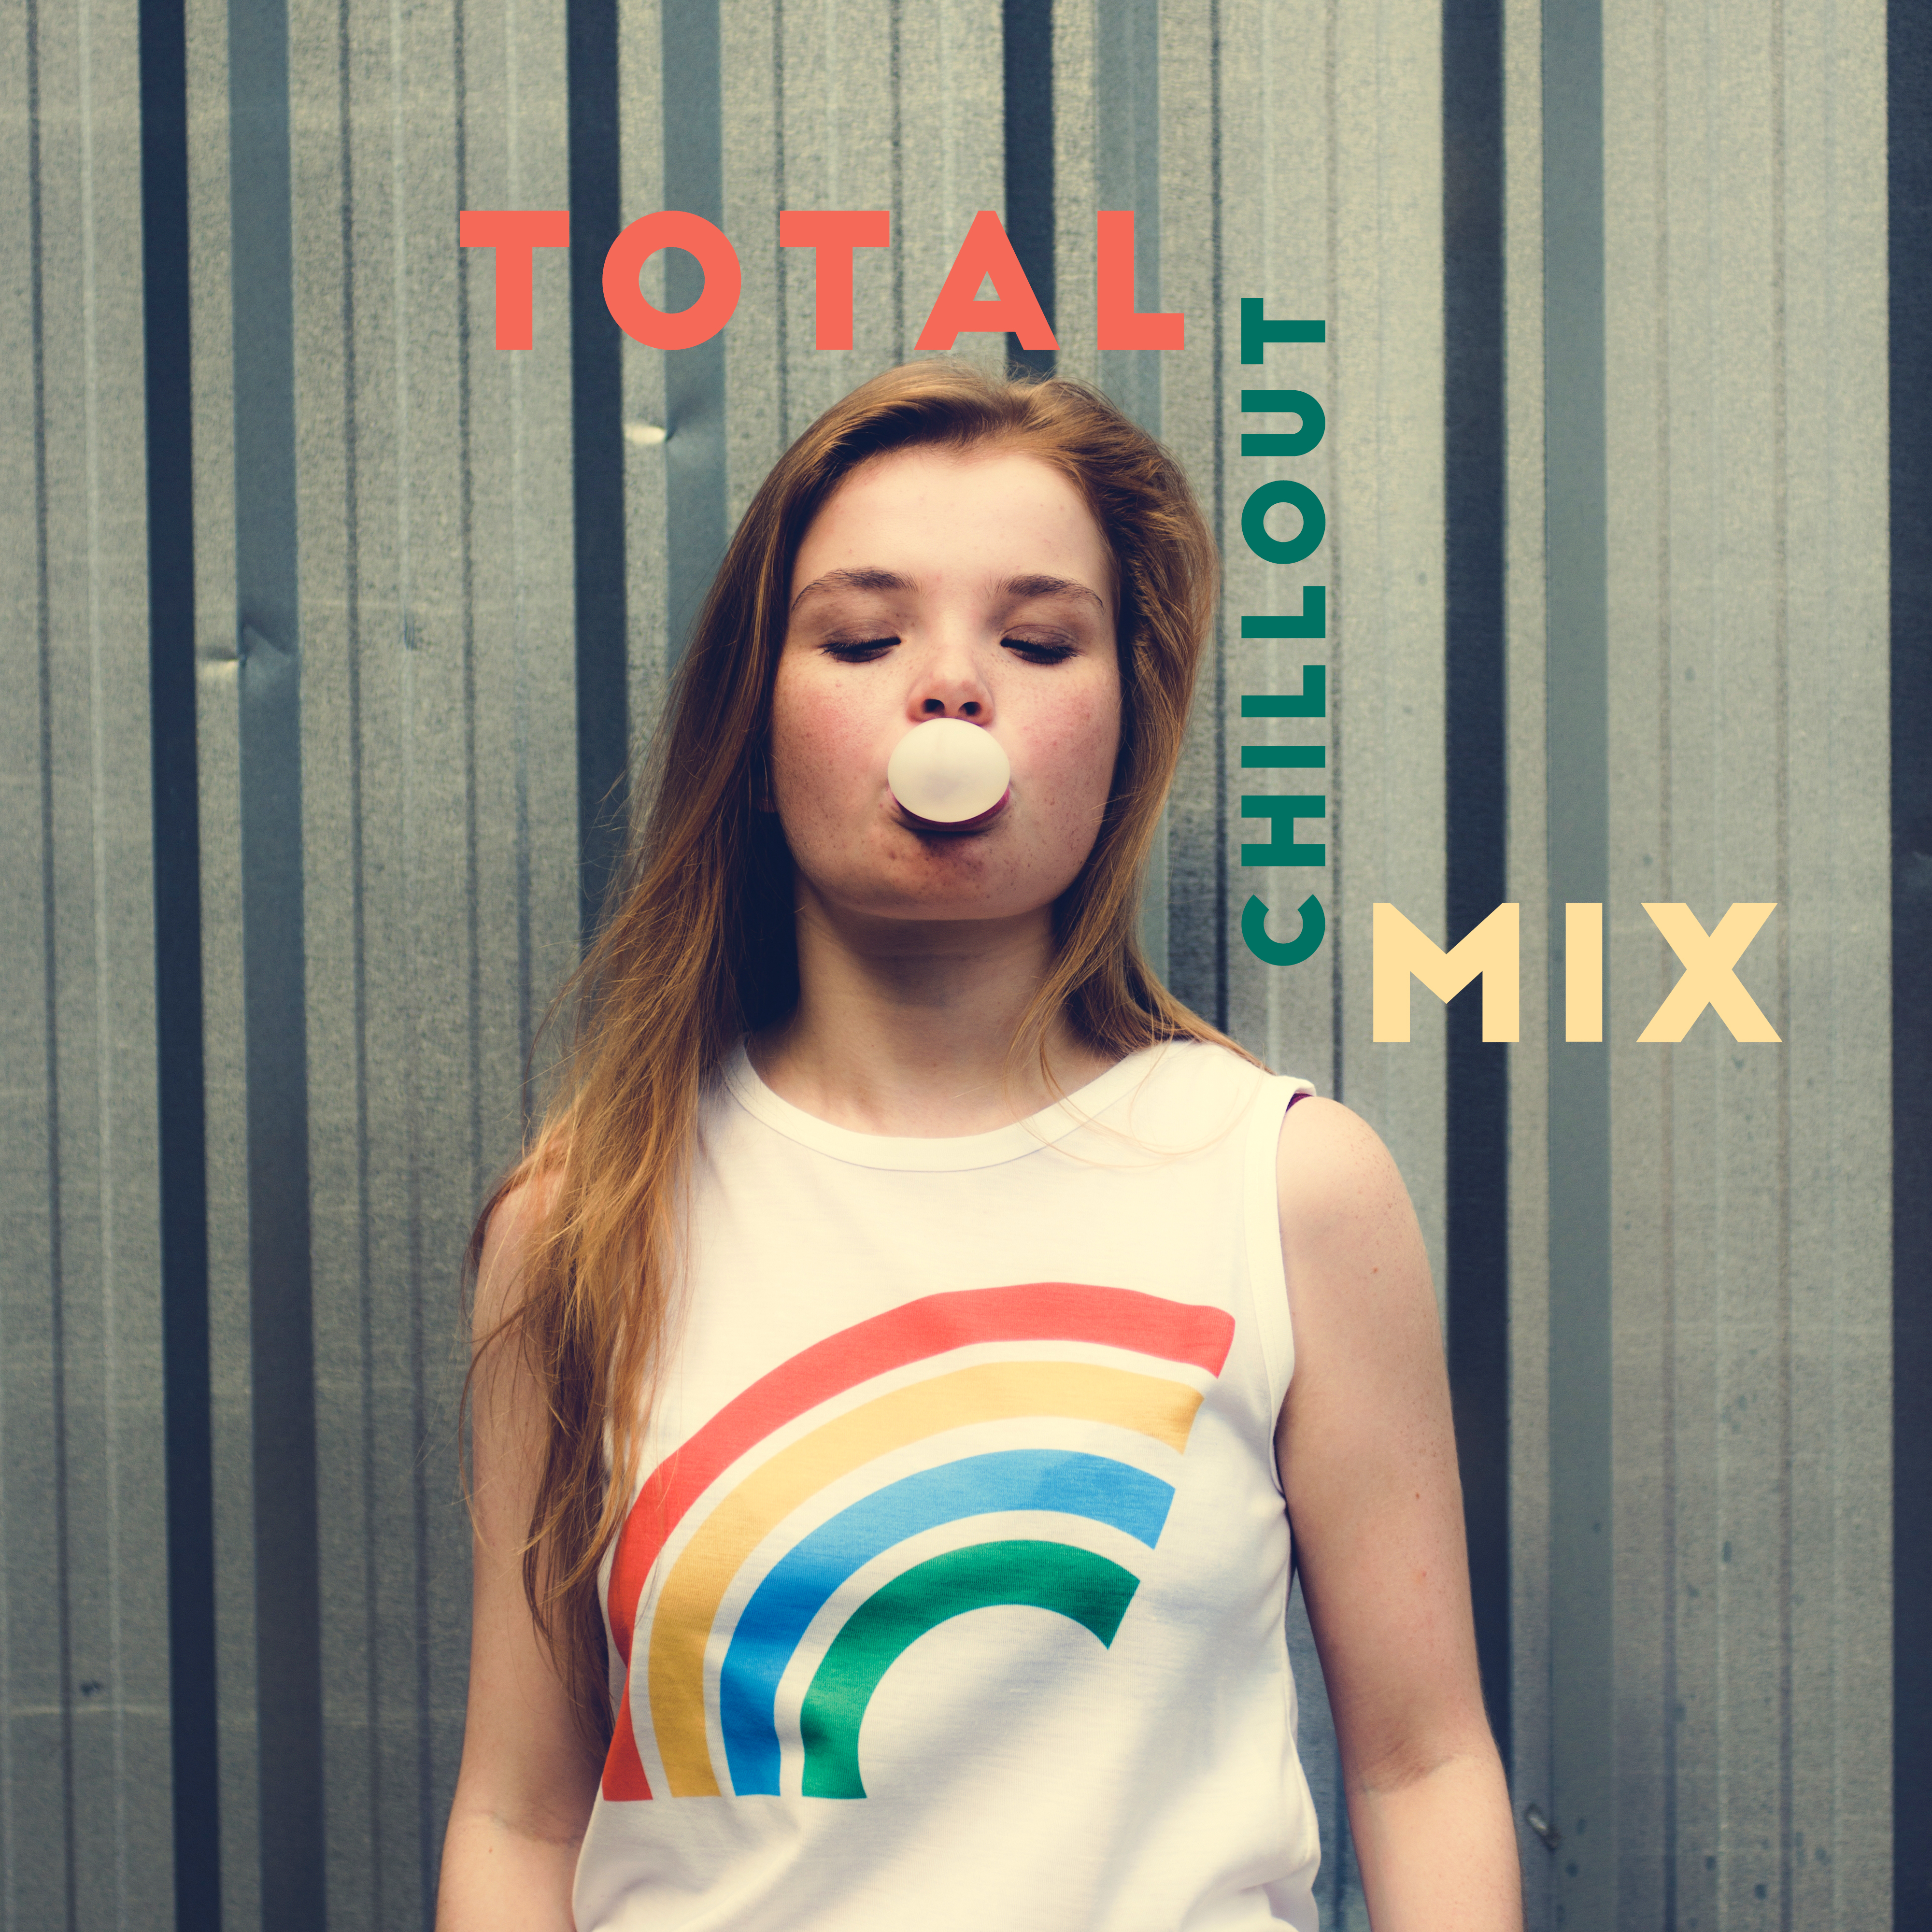 Total Chillout Mix